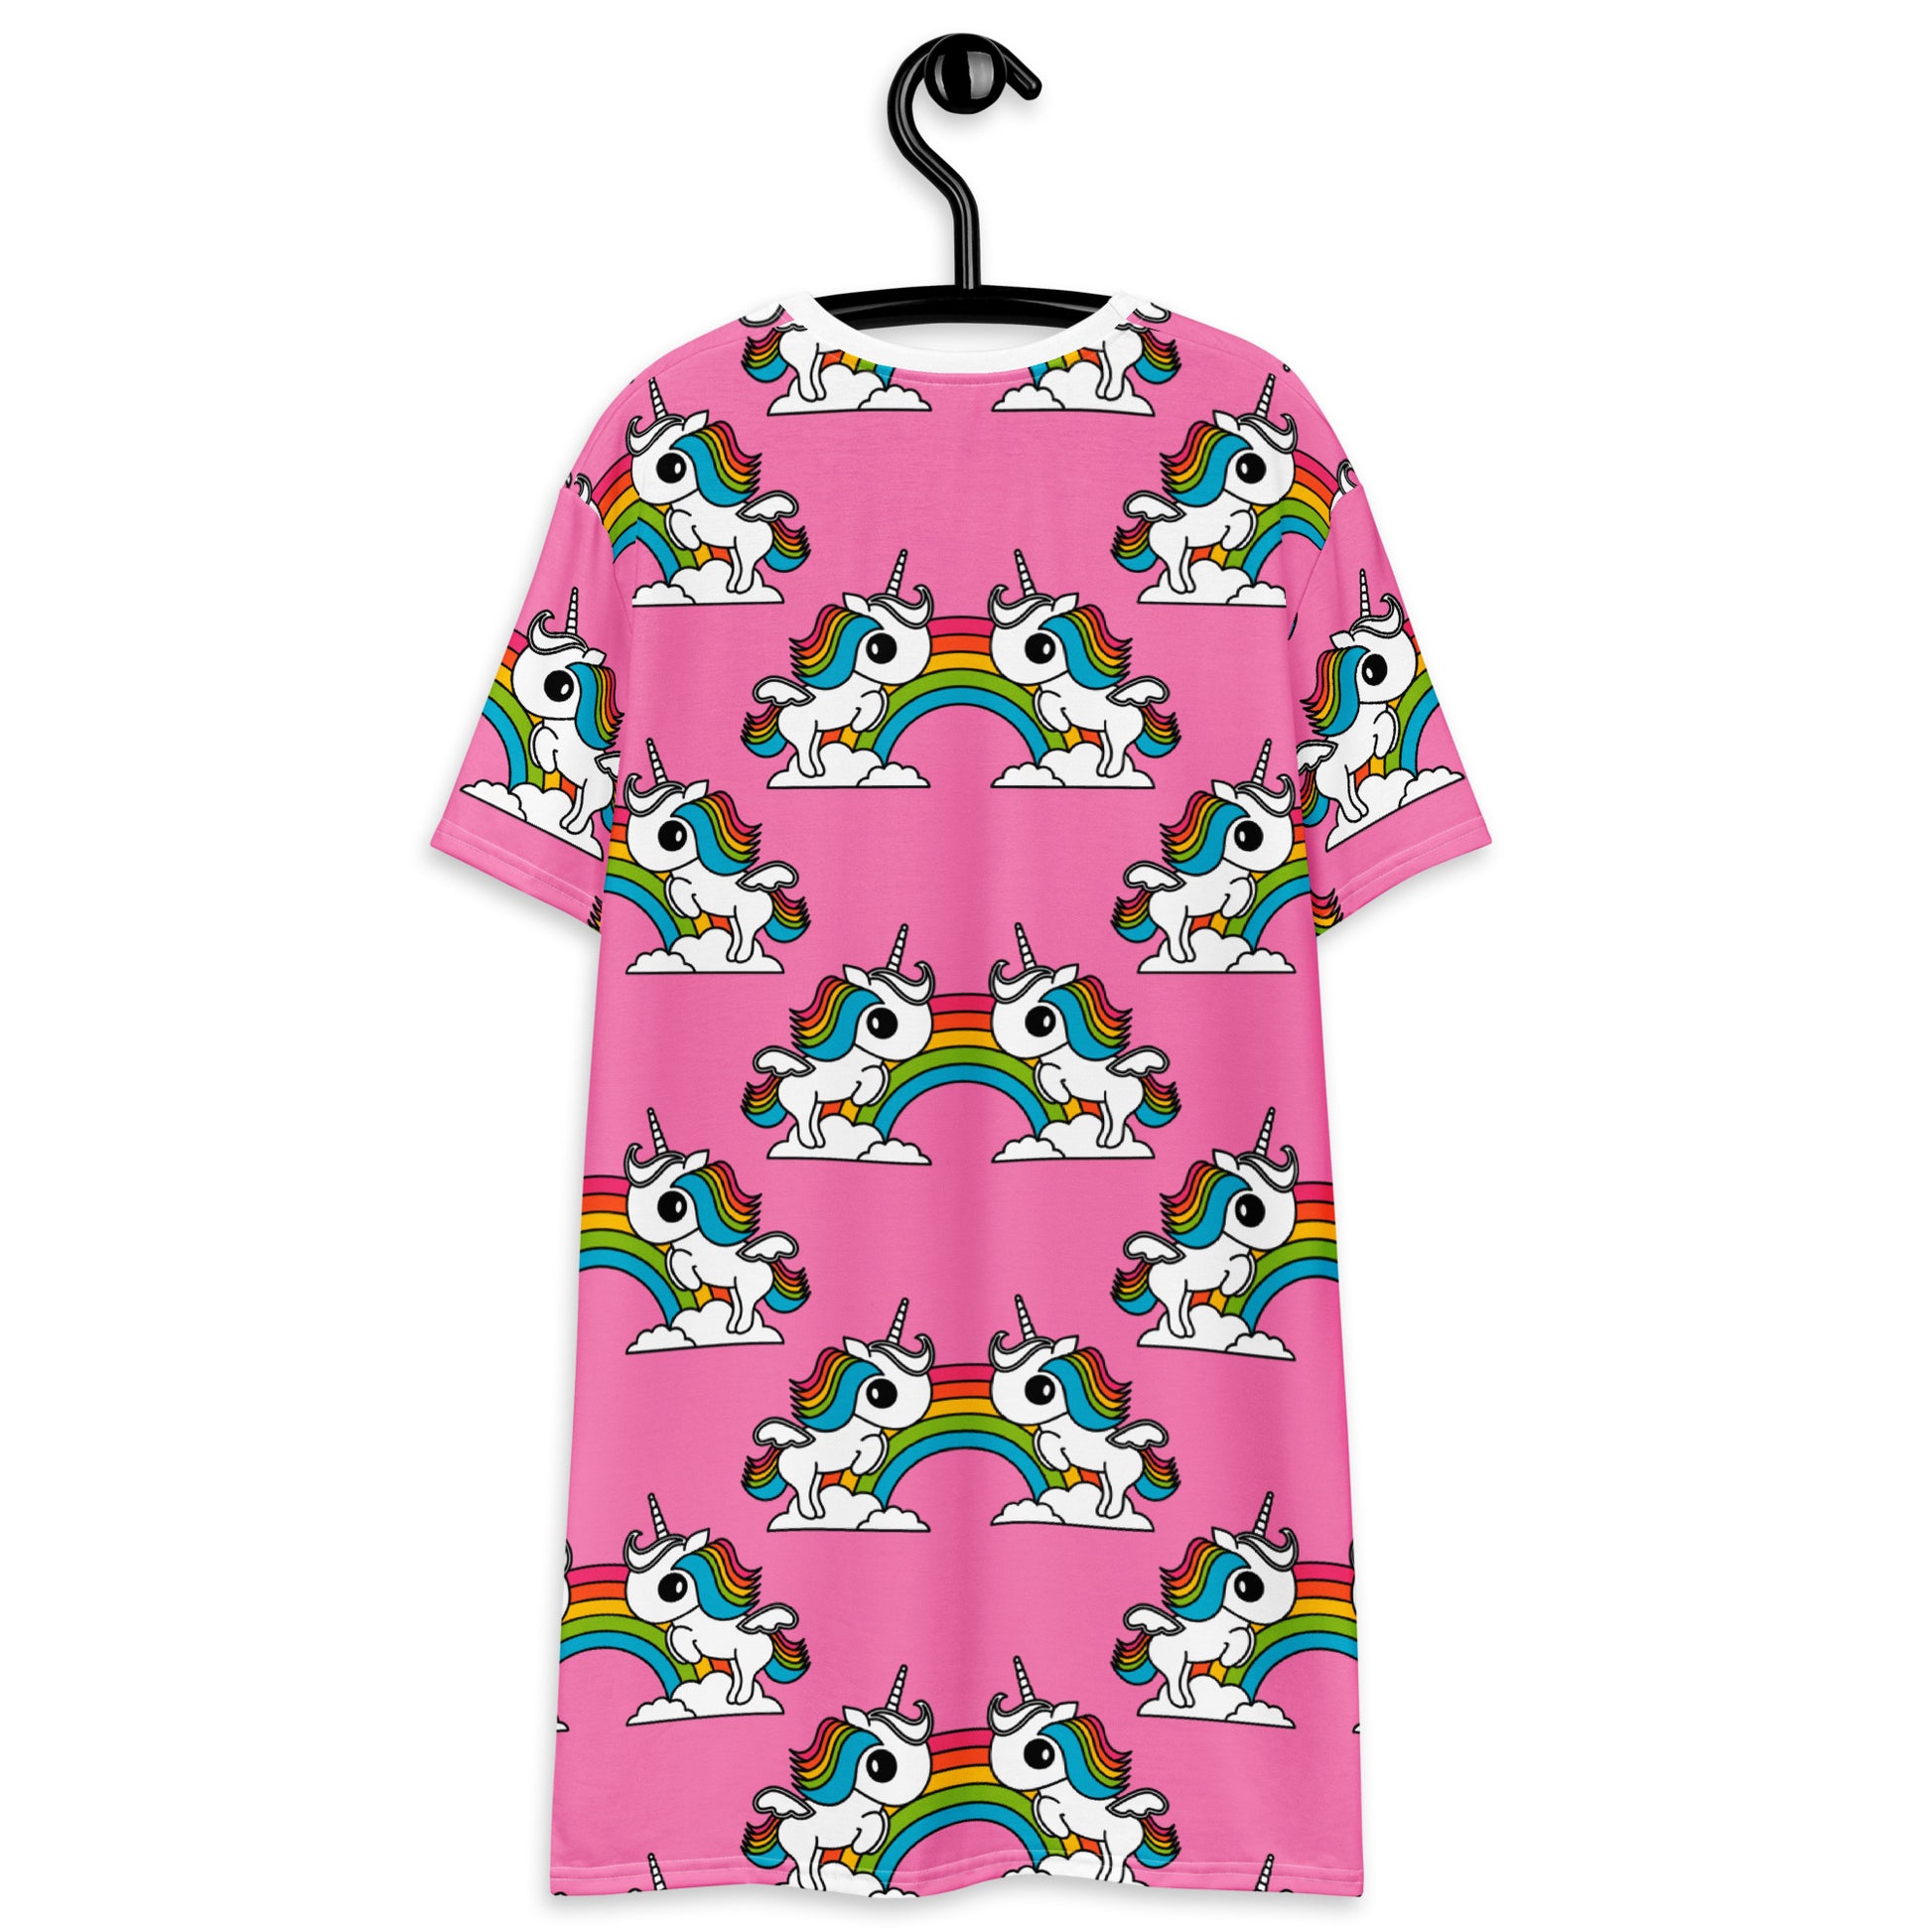 UNIQUE pink - T-shirt dress with unicorns and rainbows